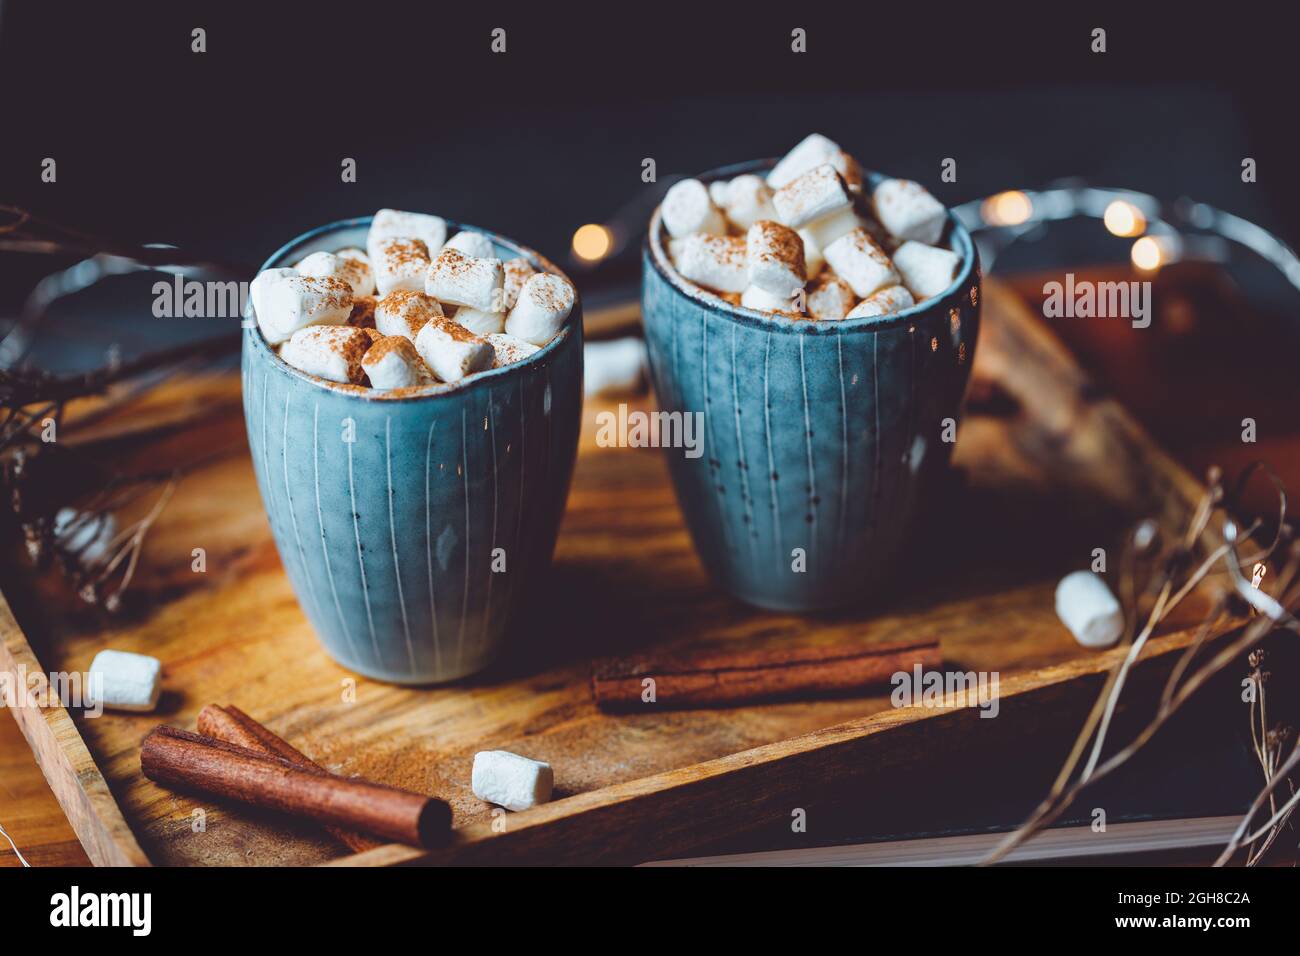 Hot chocolate with marshmallow and cinnamon in blue ceramic cups on a table. The concept of cosy holidays and New Year. Stock Photo